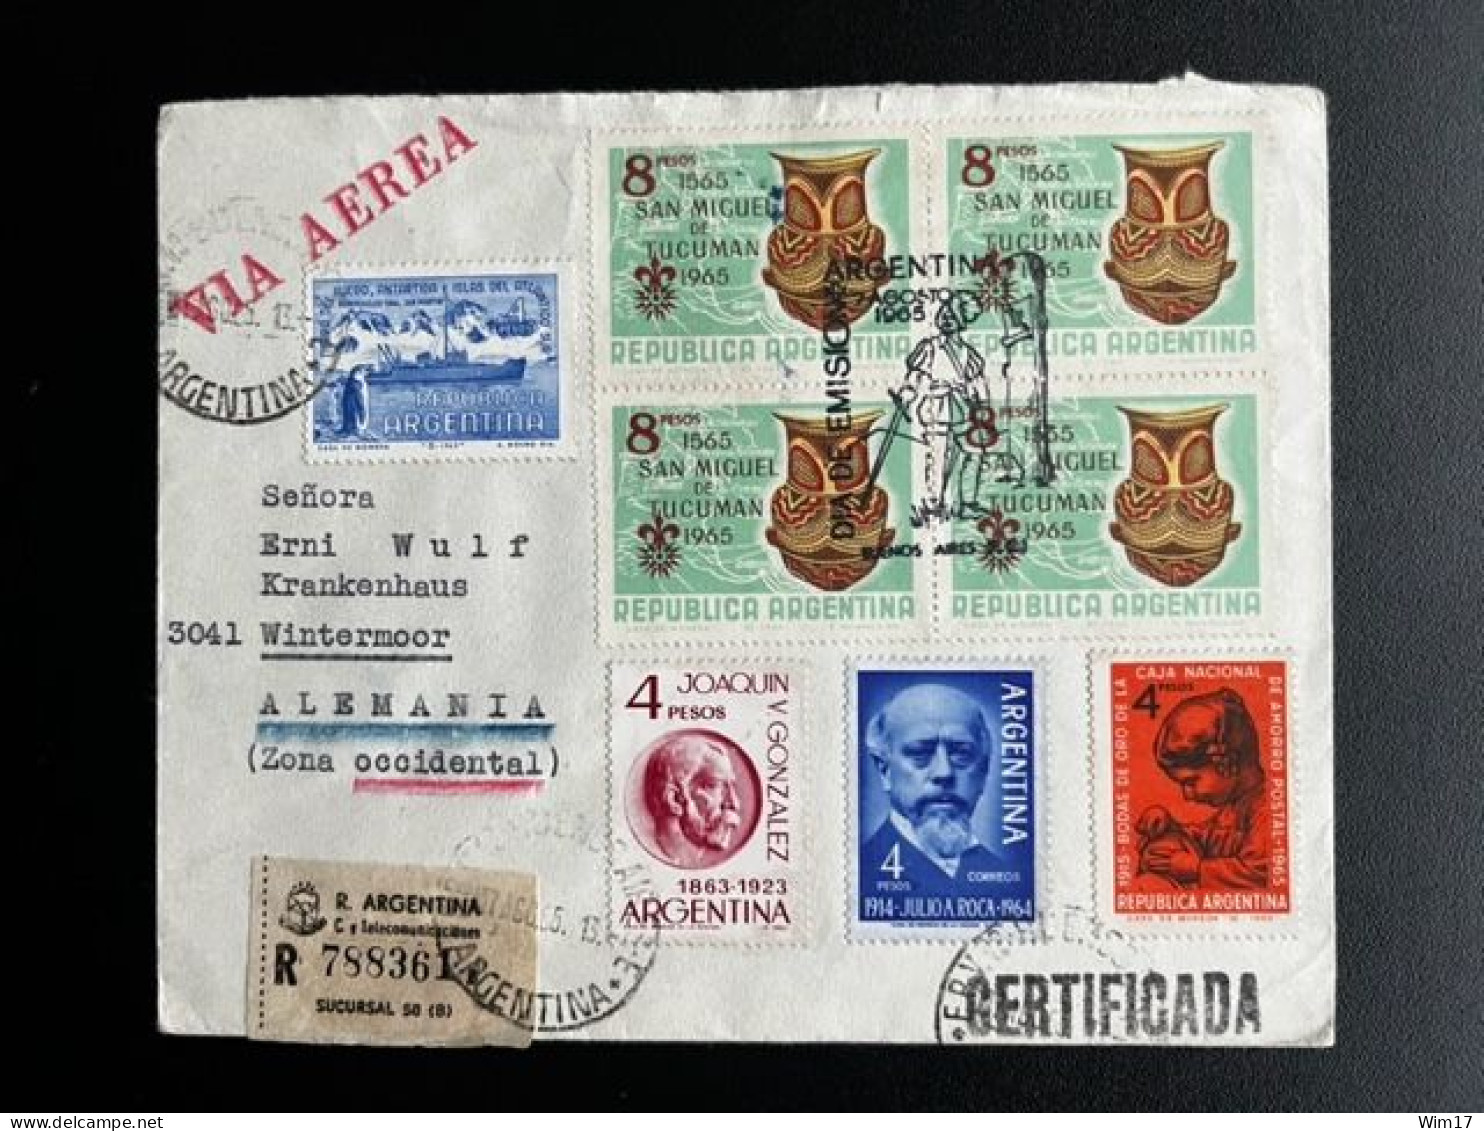 ARGENTINA 1965 REGISTERED AIR MAIL LETTER BUENOS AIRES TO WINTERMOOR 07-08-1965 CERTIFICADO - Briefe U. Dokumente